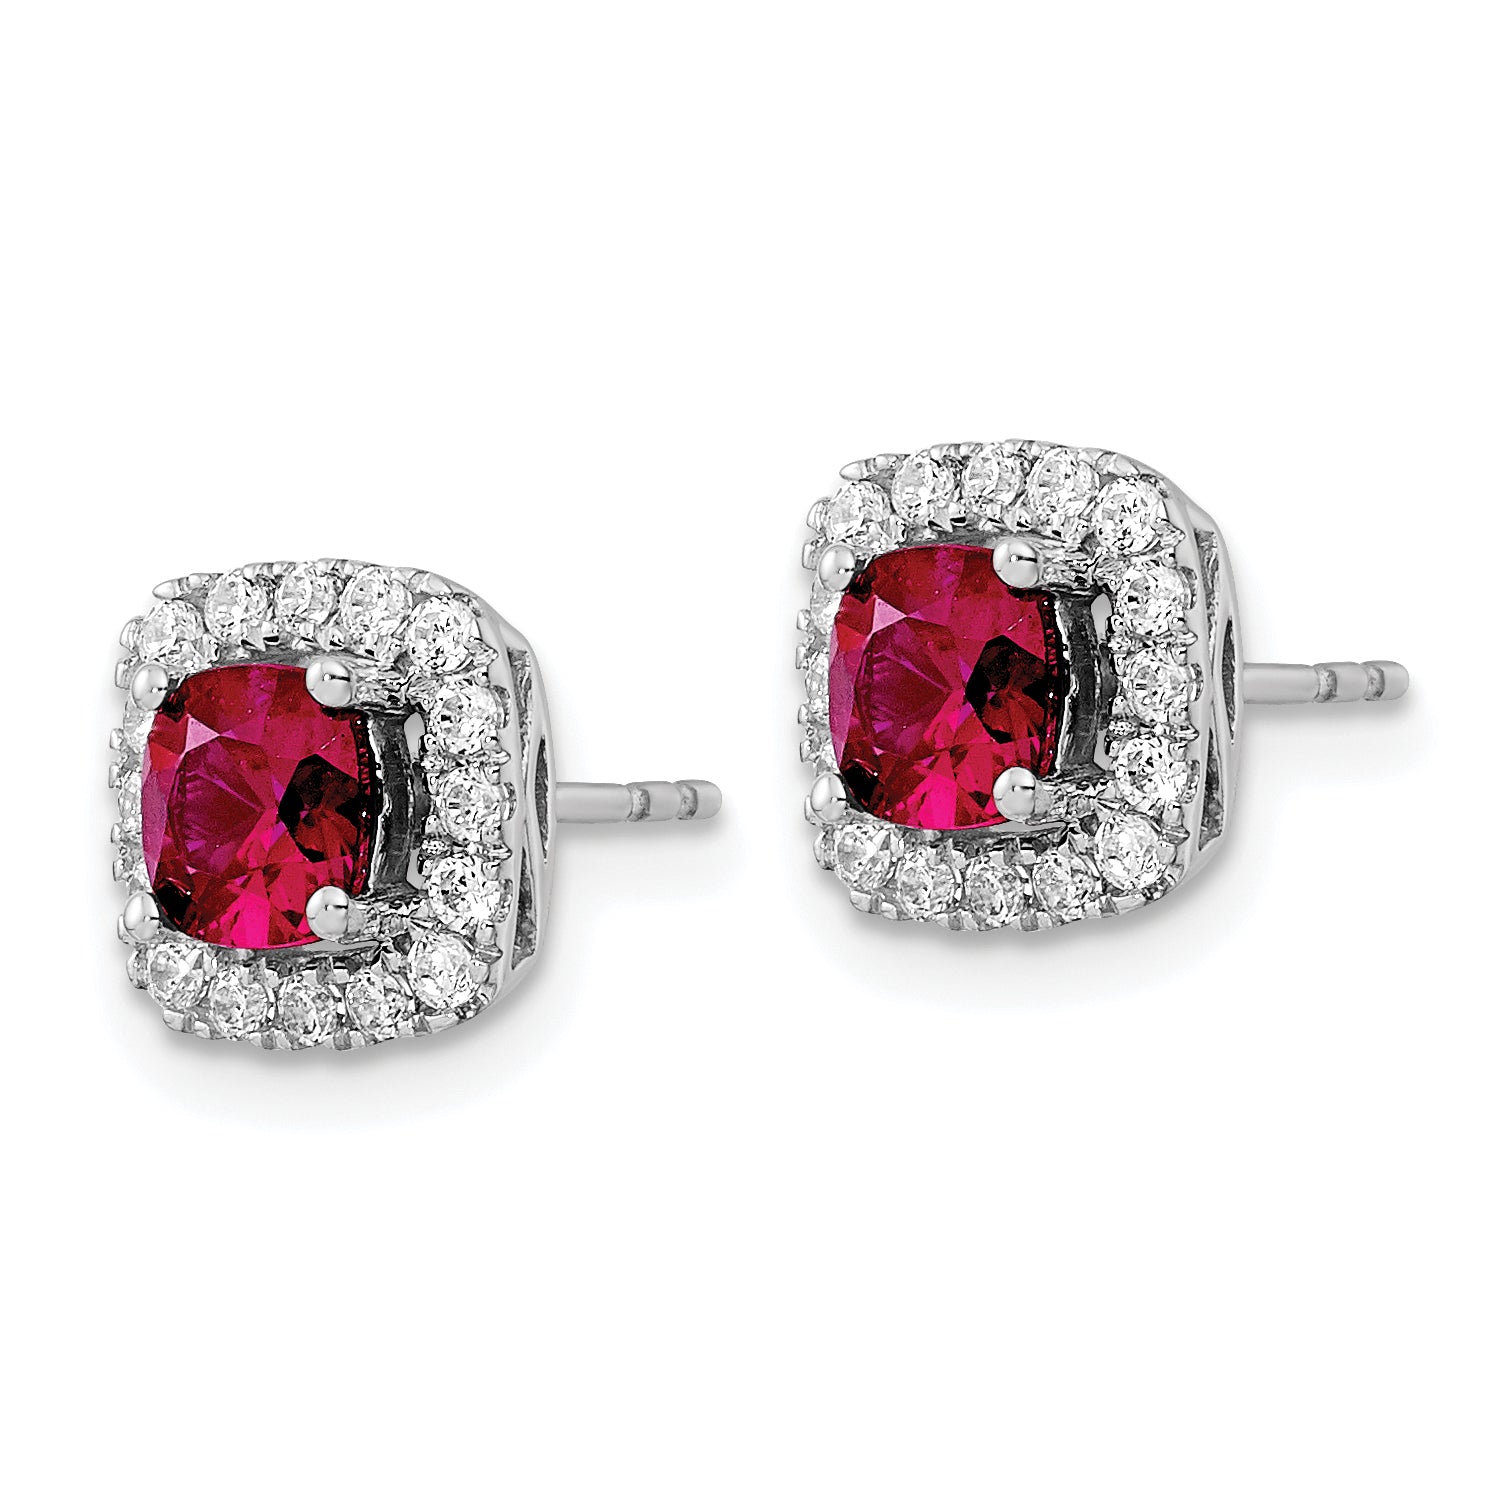 14K White Gold Lab Grown Diamond and Created Ruby Halo Post Earrings